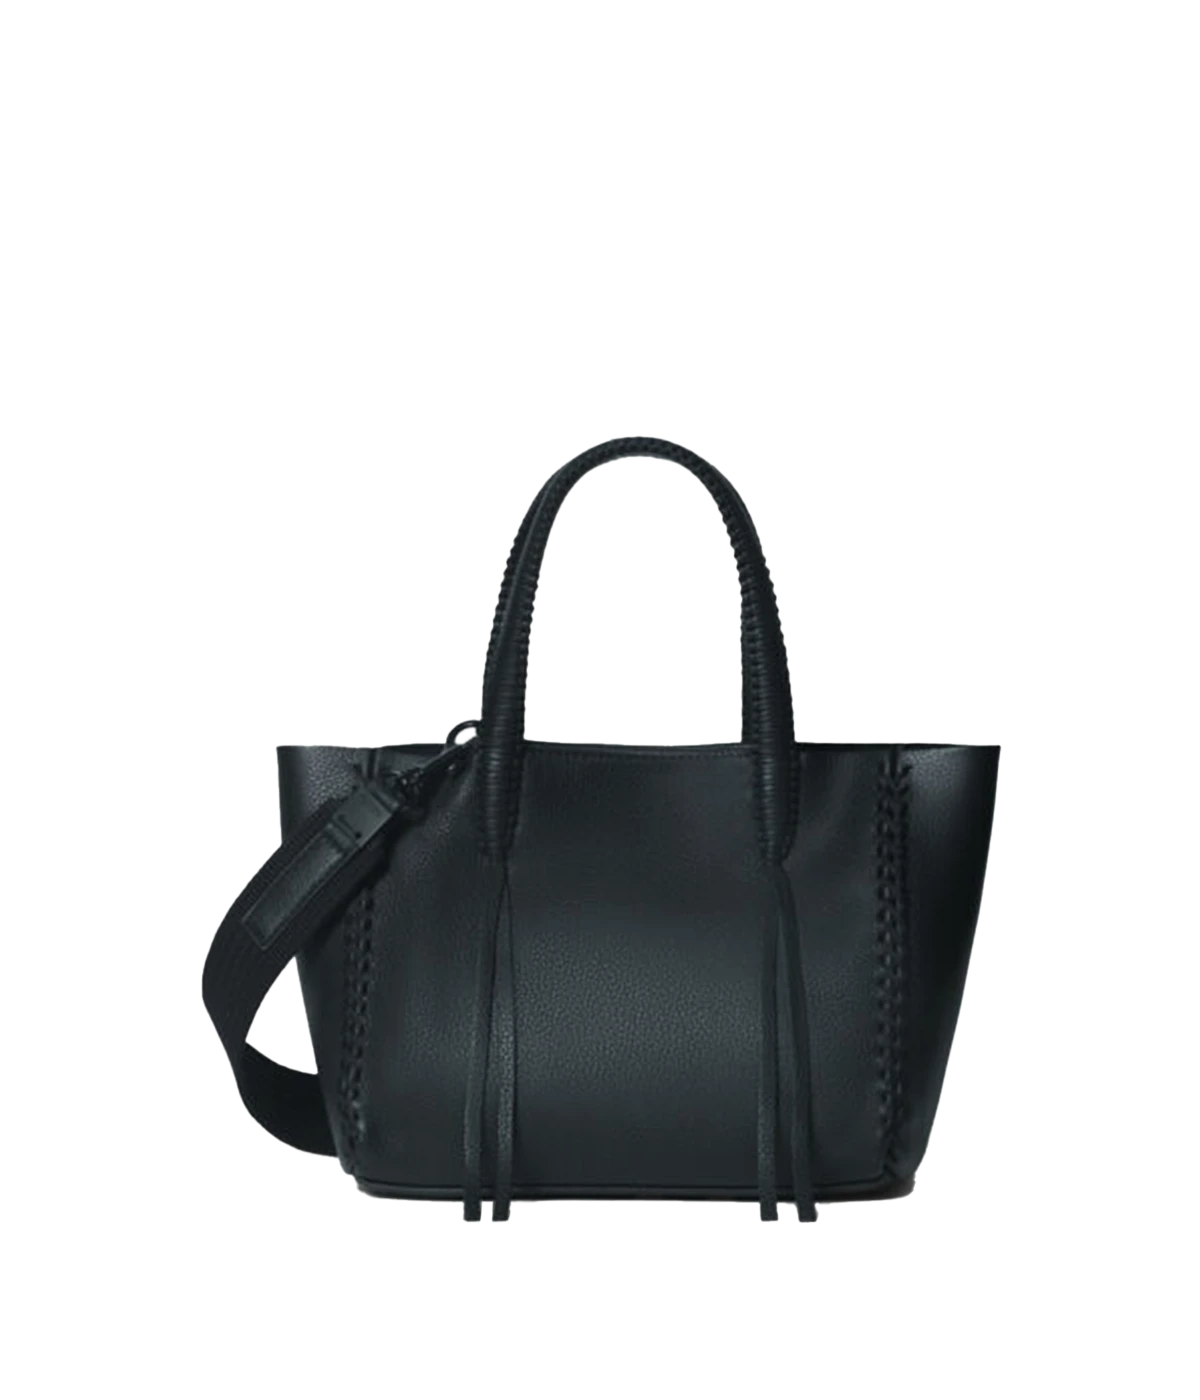 An everyday small tote bag in black, featuring 100% calf leather, two weaved handles, removable adjustable shoulder strap, unlined, internal pocket, zip closure, woven hand stitch detail, tassel. Made in Greece, luxury leather, everyday work bag, mum bag throw on and go. 